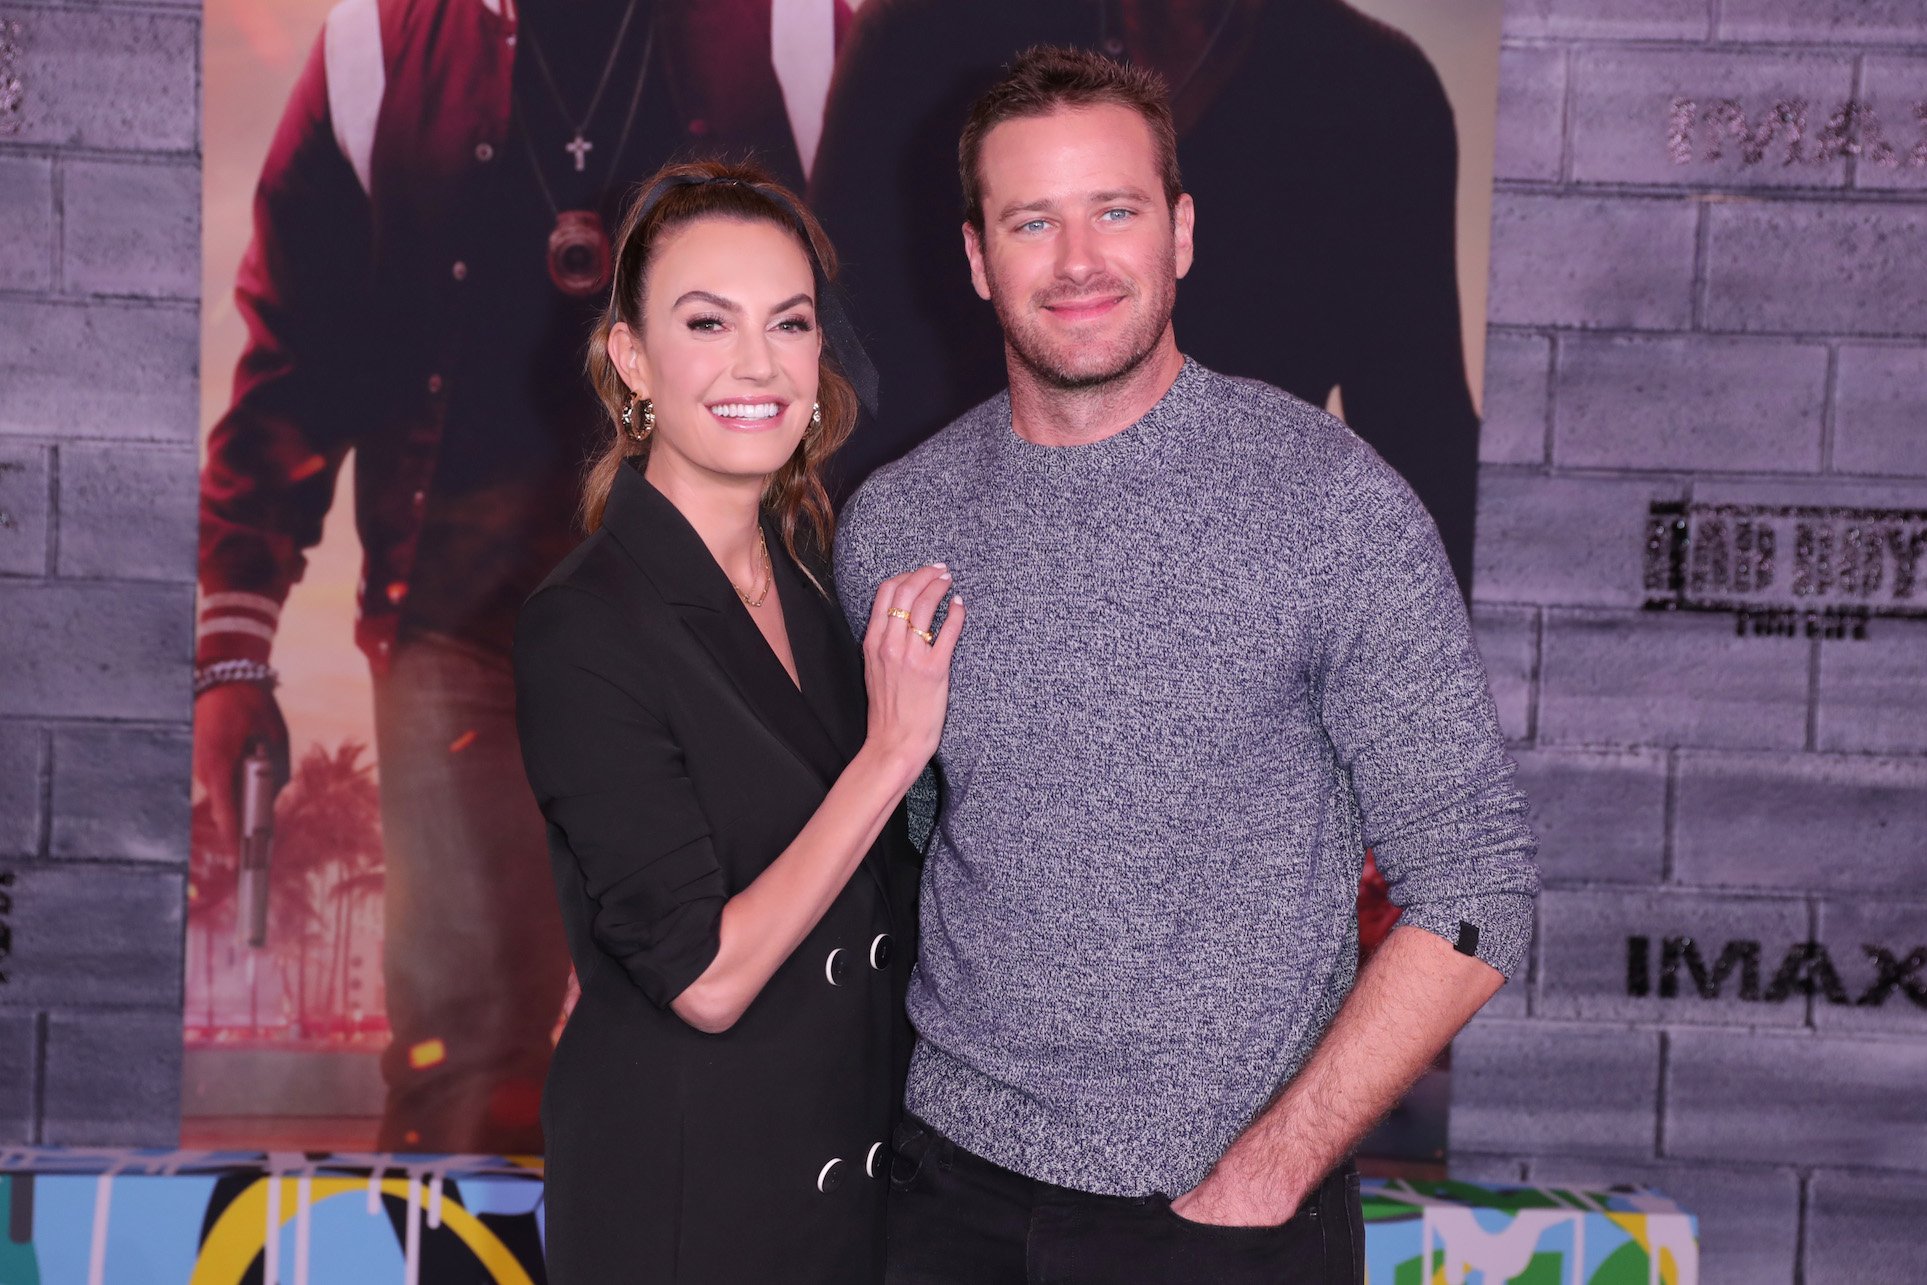 Elizabeth Chambers and Armie Hammer smiling for the camera. Armie Hammer's age is 33, and Elizabeth Chambers is 37